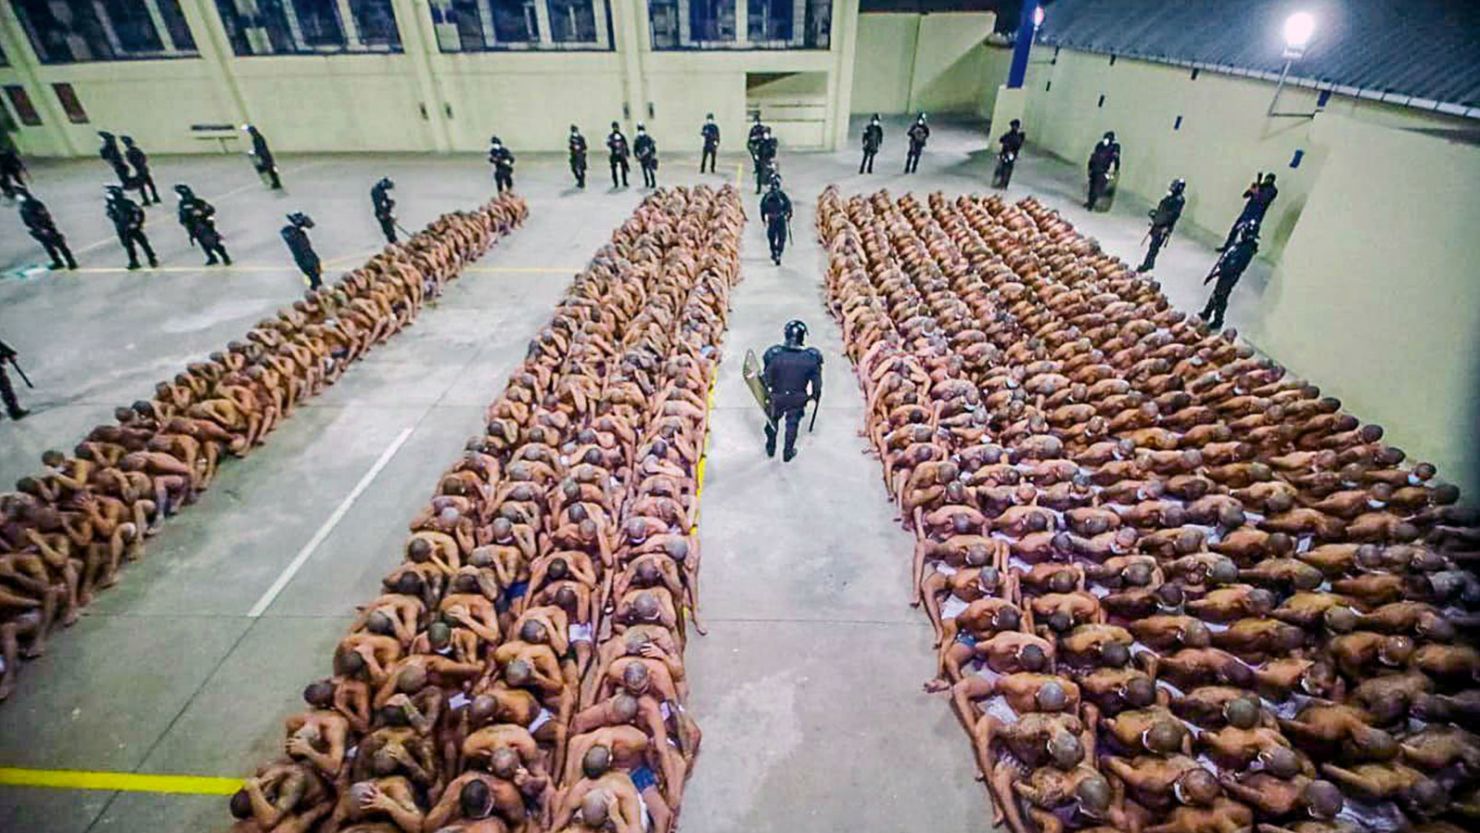 Inmates at Izalco jail are lined up together during a 24-hour lockdown ordered by El Salvador's President Nayib Bukele.